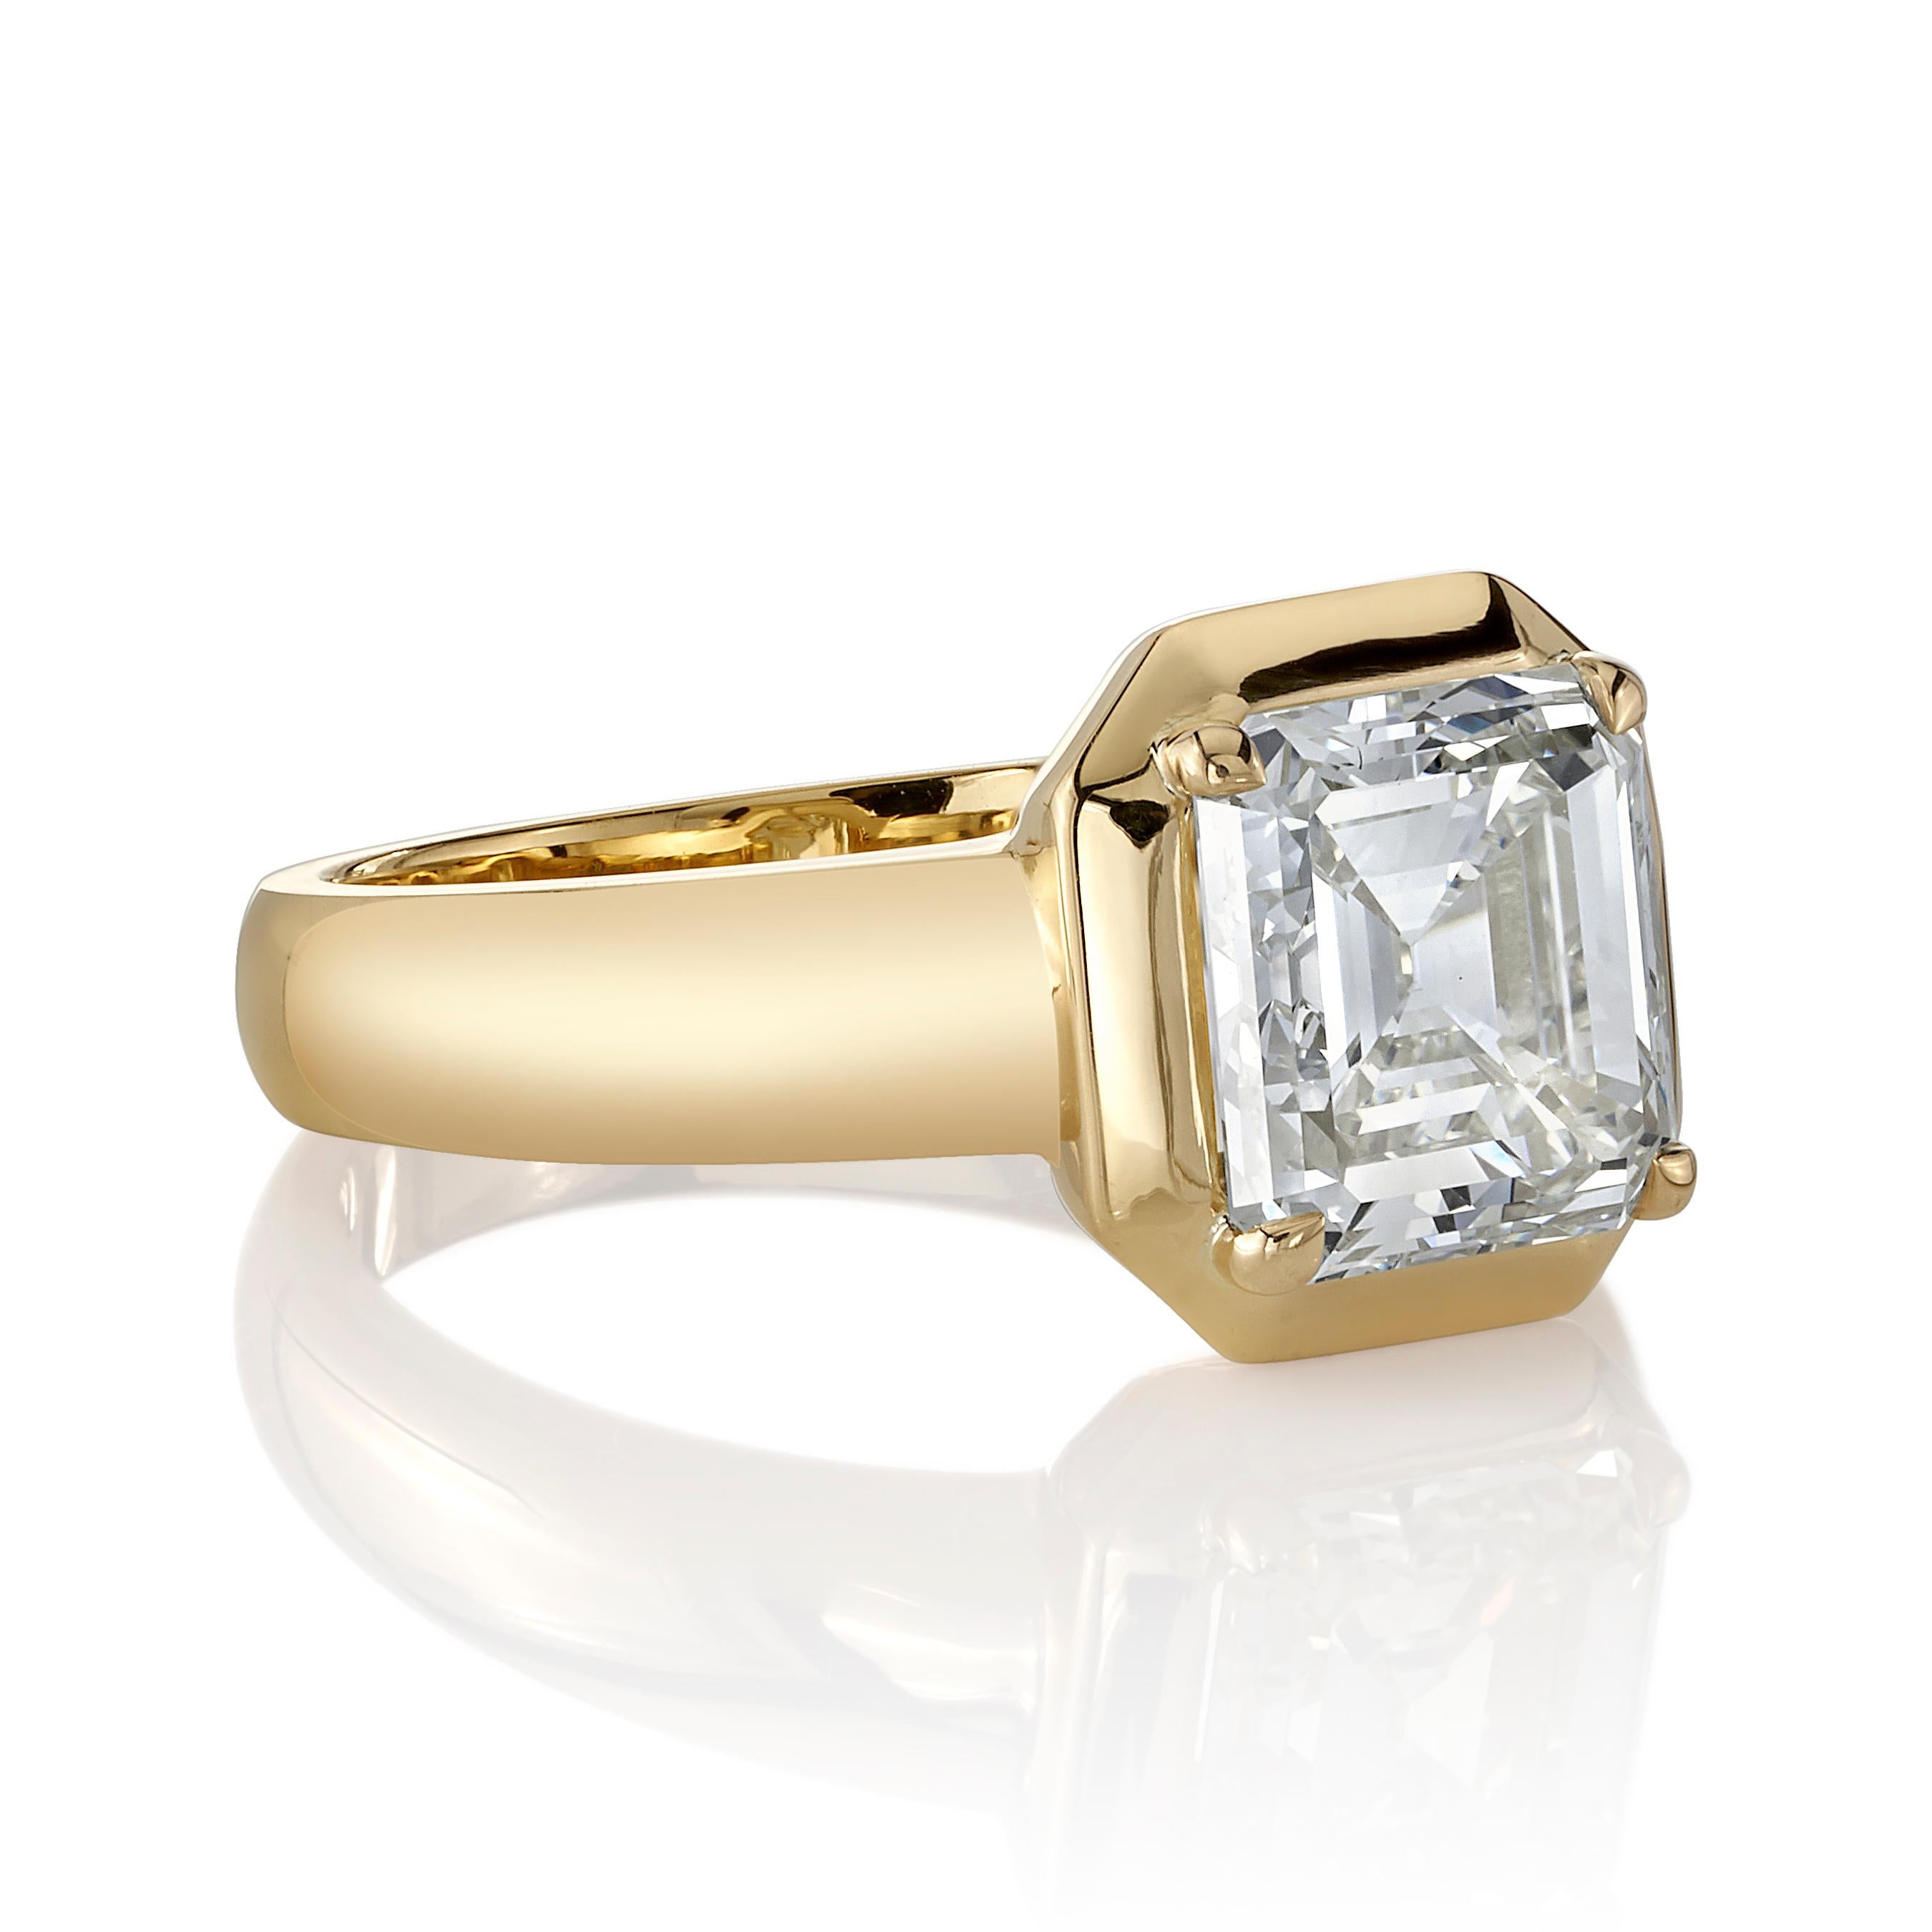 2.64ctw N/VS1 GIA certified Asscher cut diamond set in a handcrafted 18K yellow gold mounting.

Ring is currently a size 6 and can be sized to fit. 